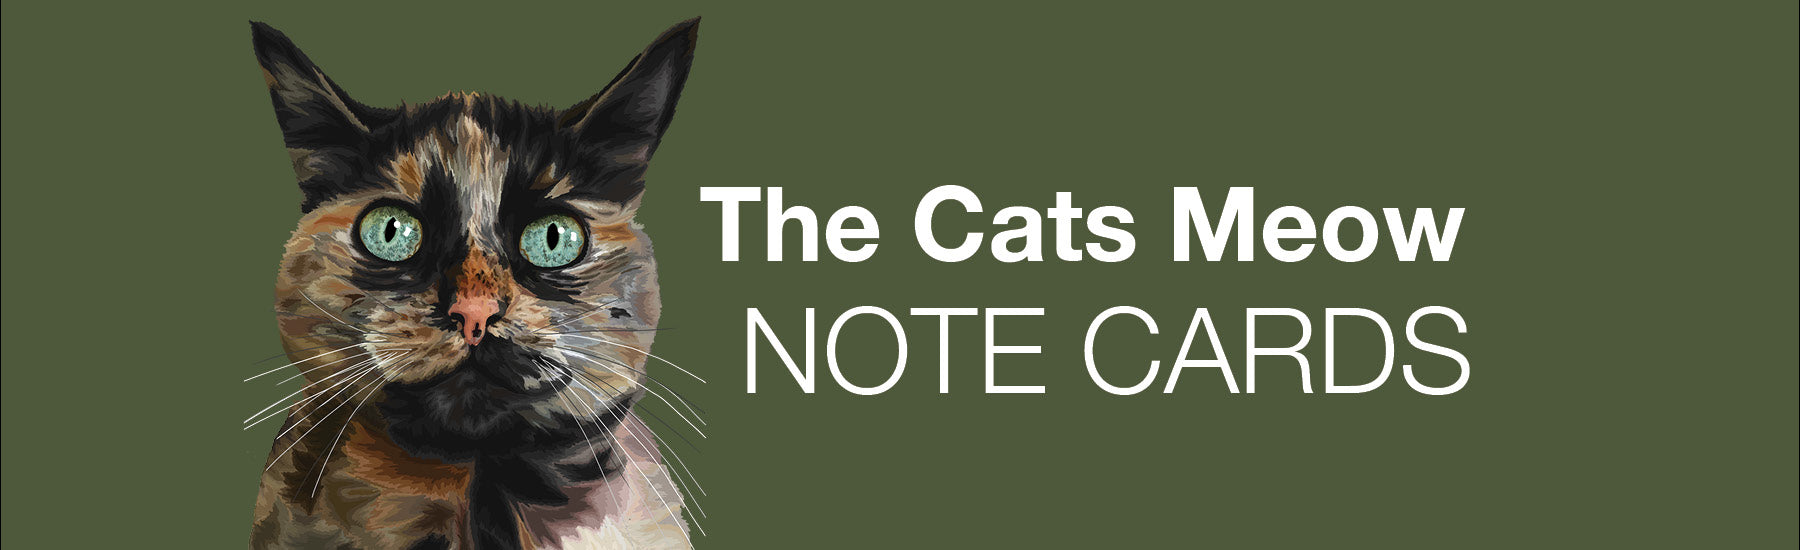 EVERYDAY CATS NOTE CARDS